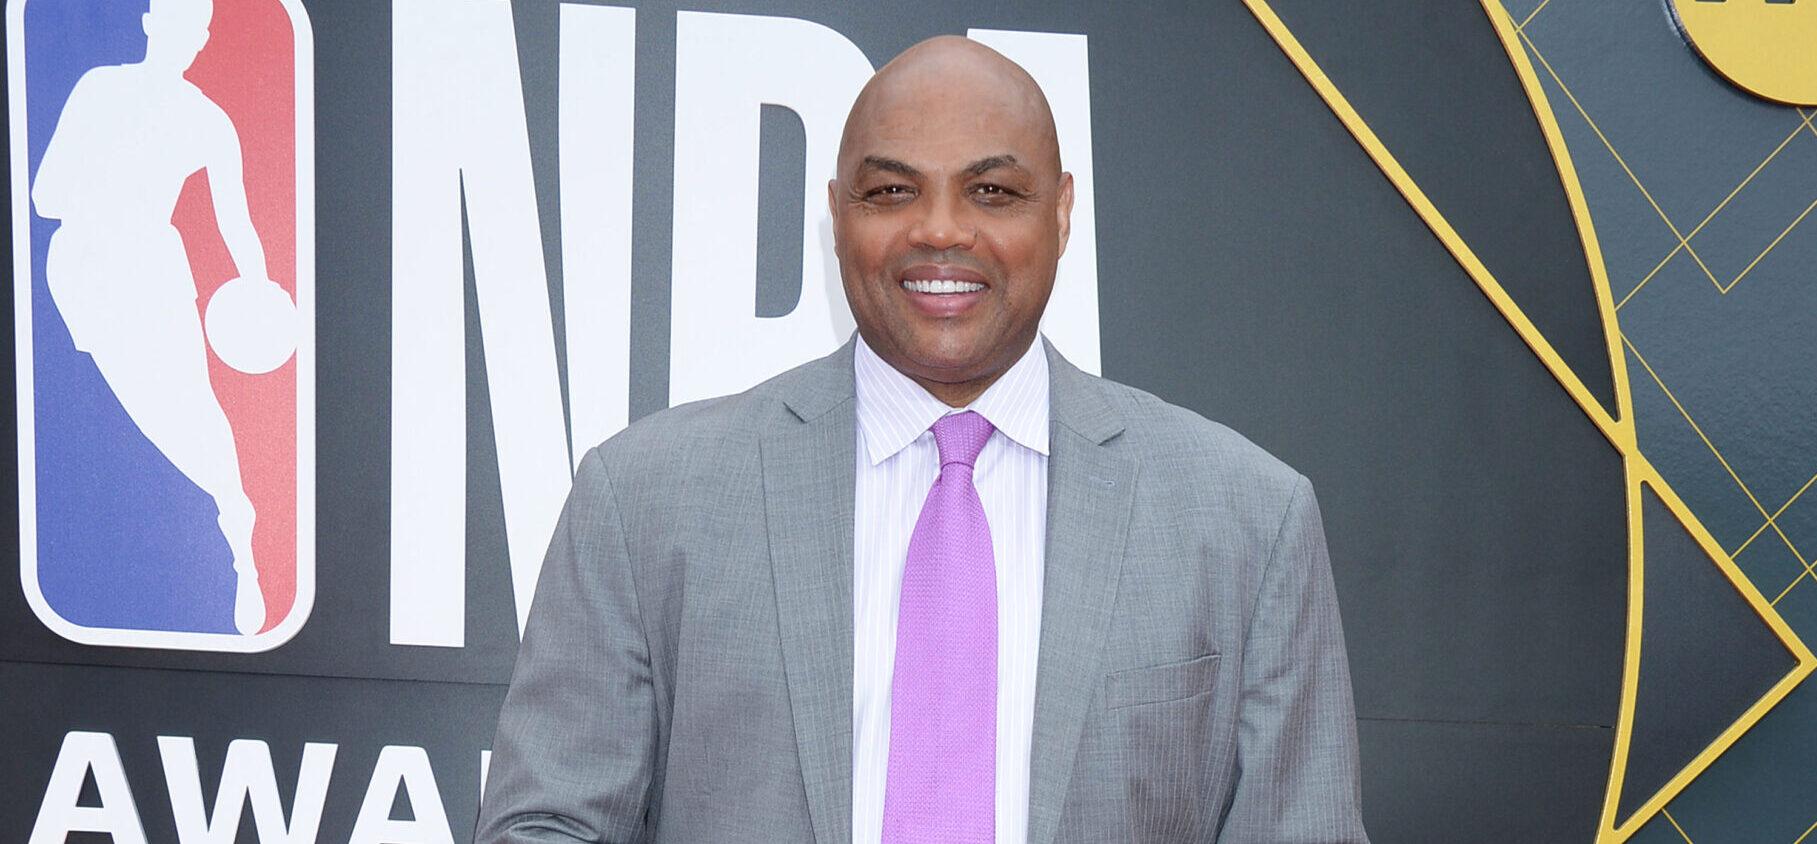 Charles Barkley Shares His Thoughts On Ja Morant; ‘This Kid Is Crying Out For Help’